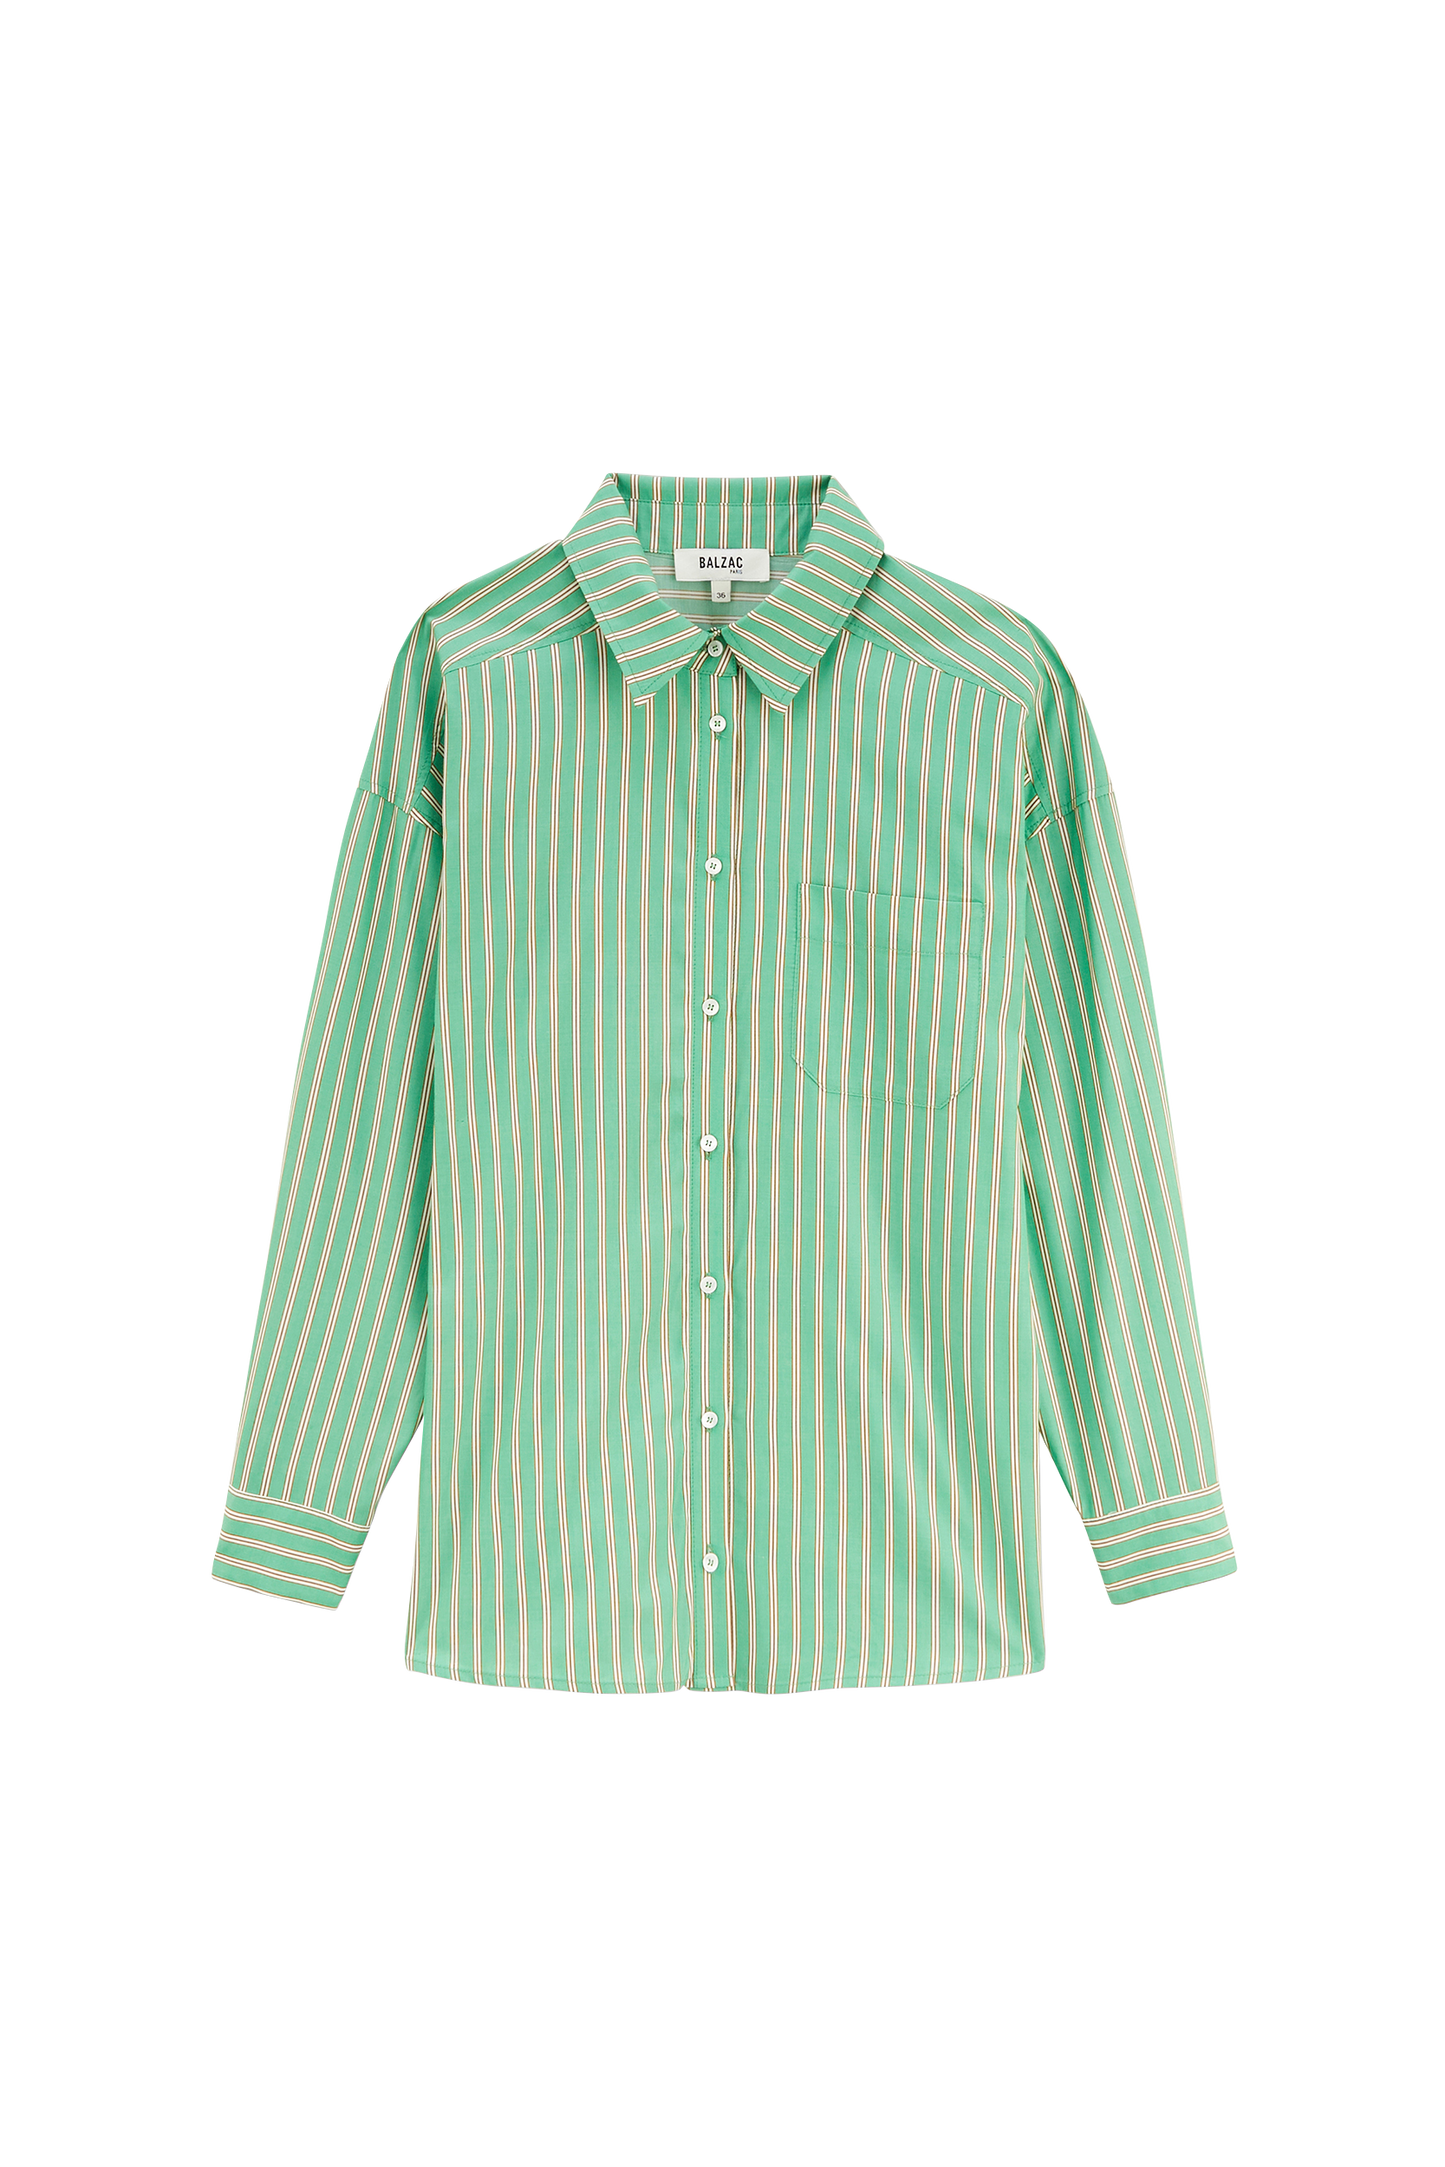 Hector green and yellow striped shirt